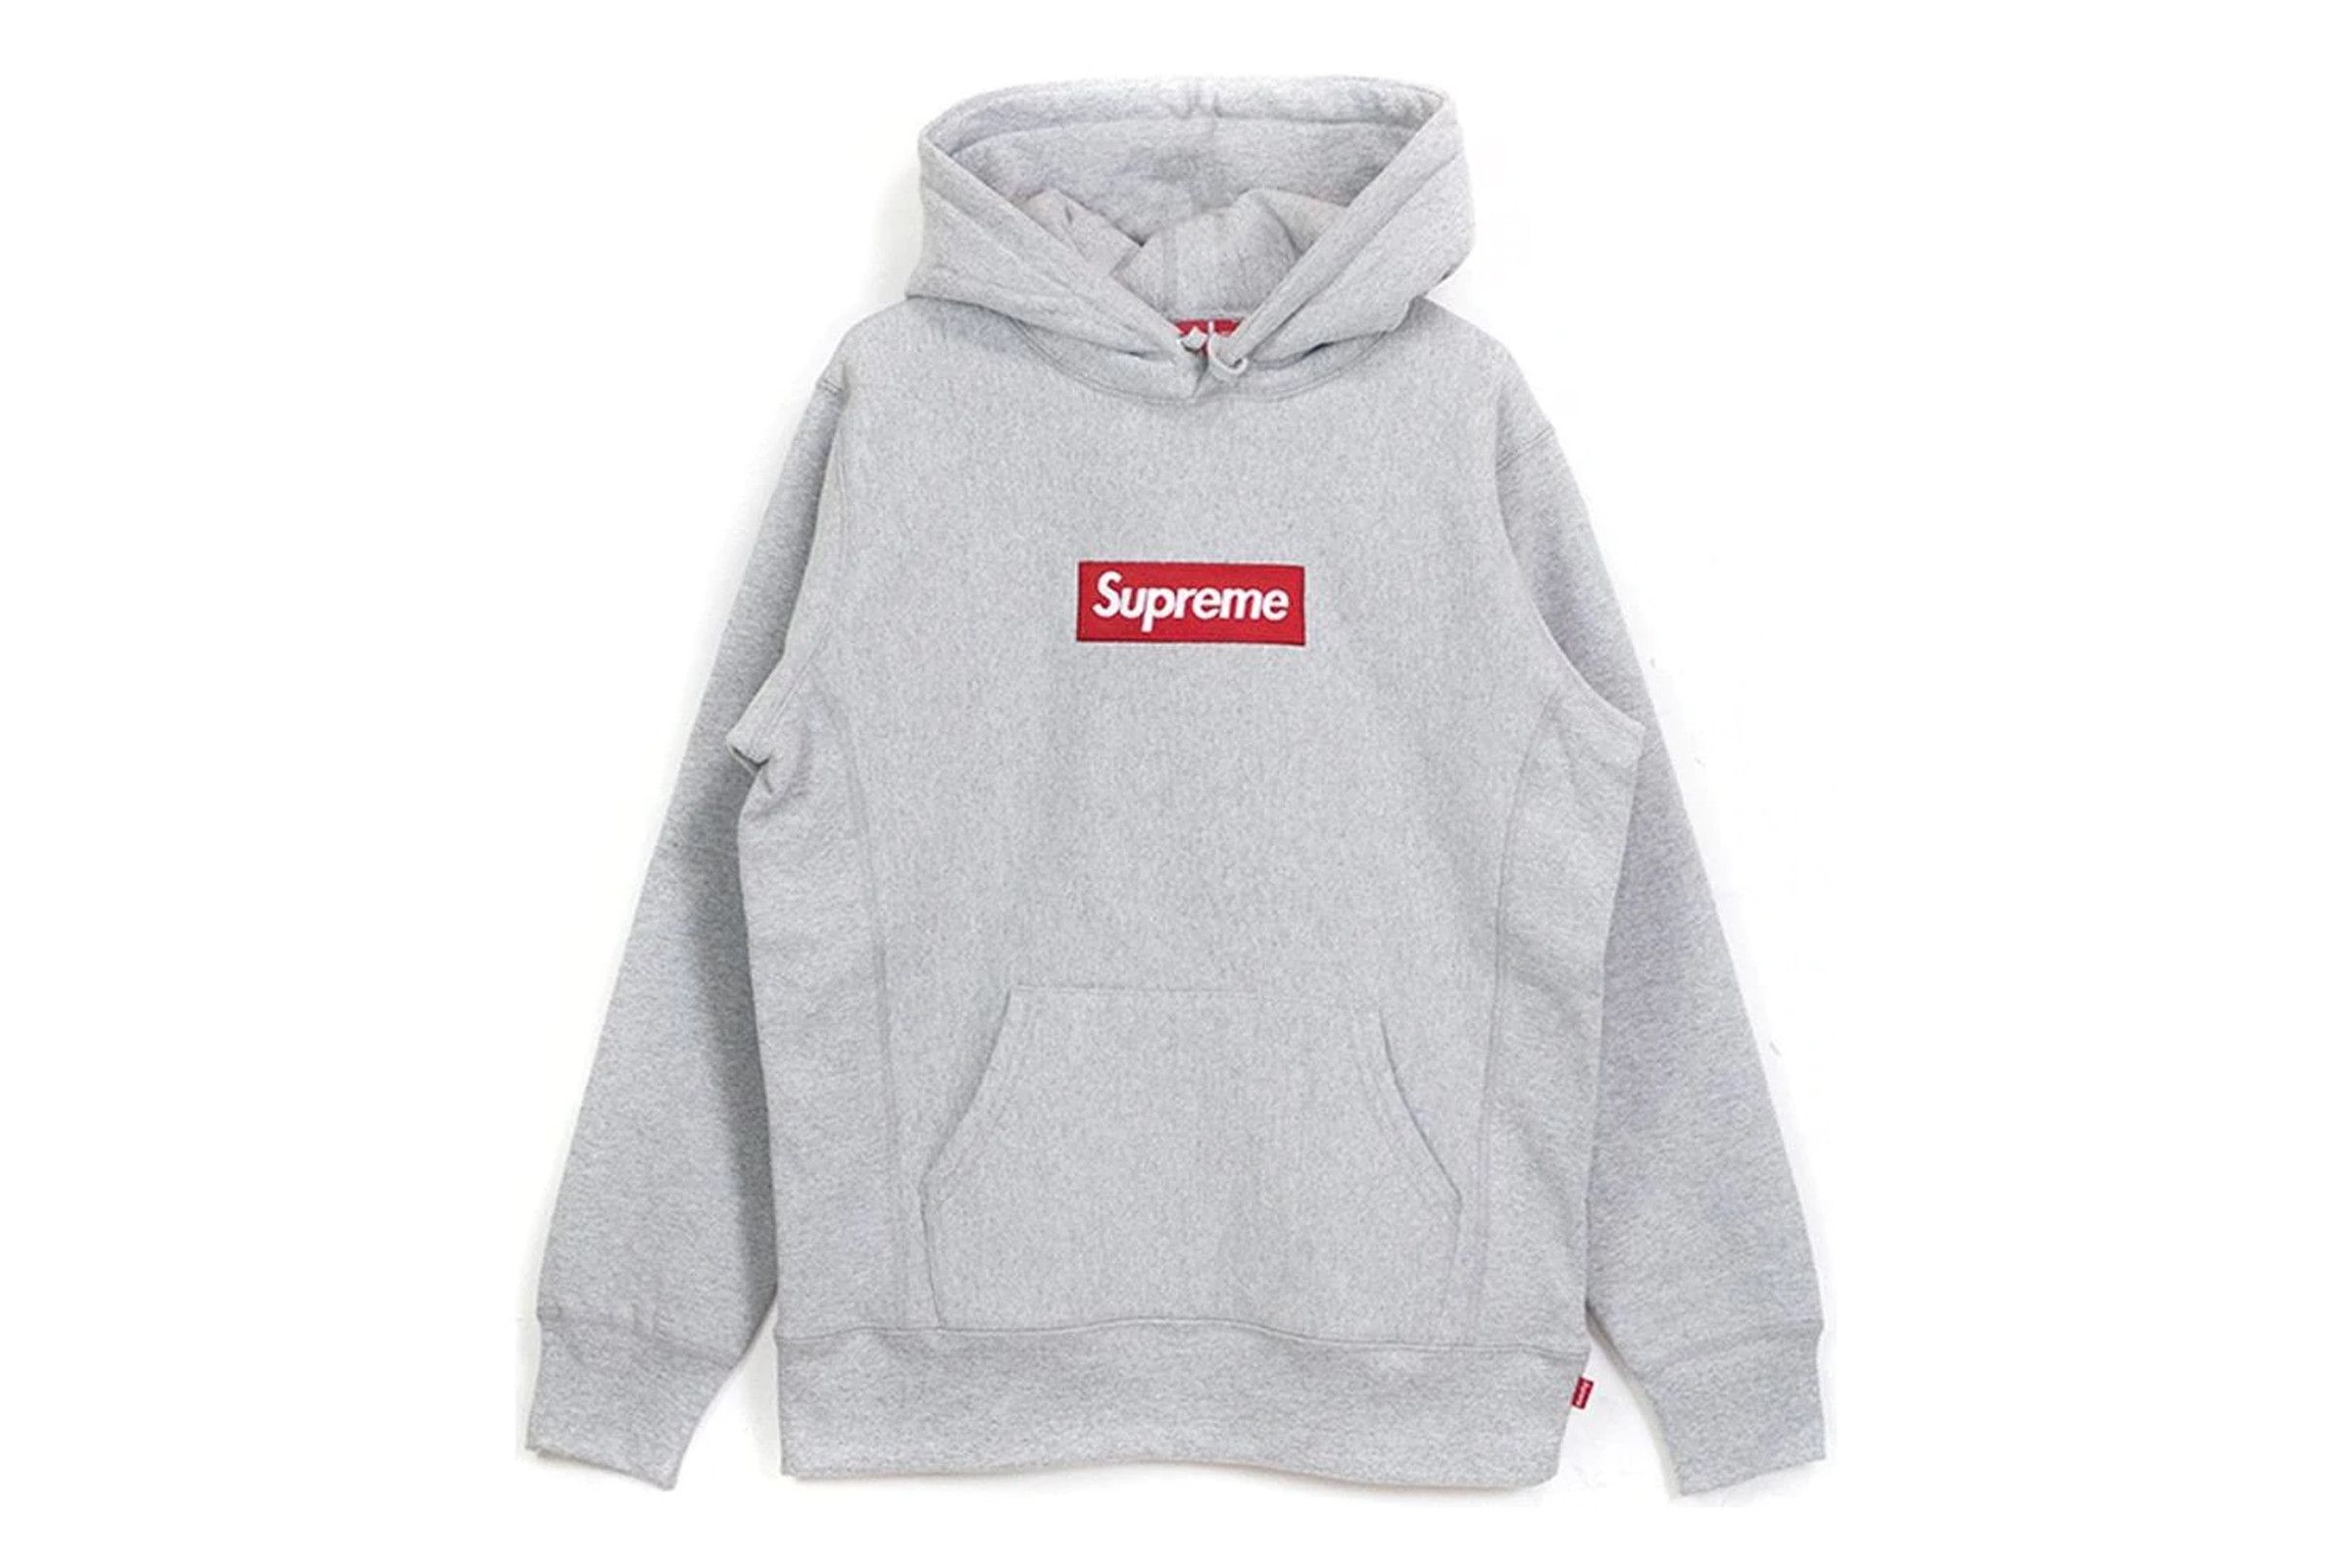 Retail or Resell on X: Item: Supreme Box Logo “Light Blue/Gold” Price:  $148 Resell:✓(High) Resell Price: $675-$780 This is definitely one of the  new colorways to grab. Light blue is easier to